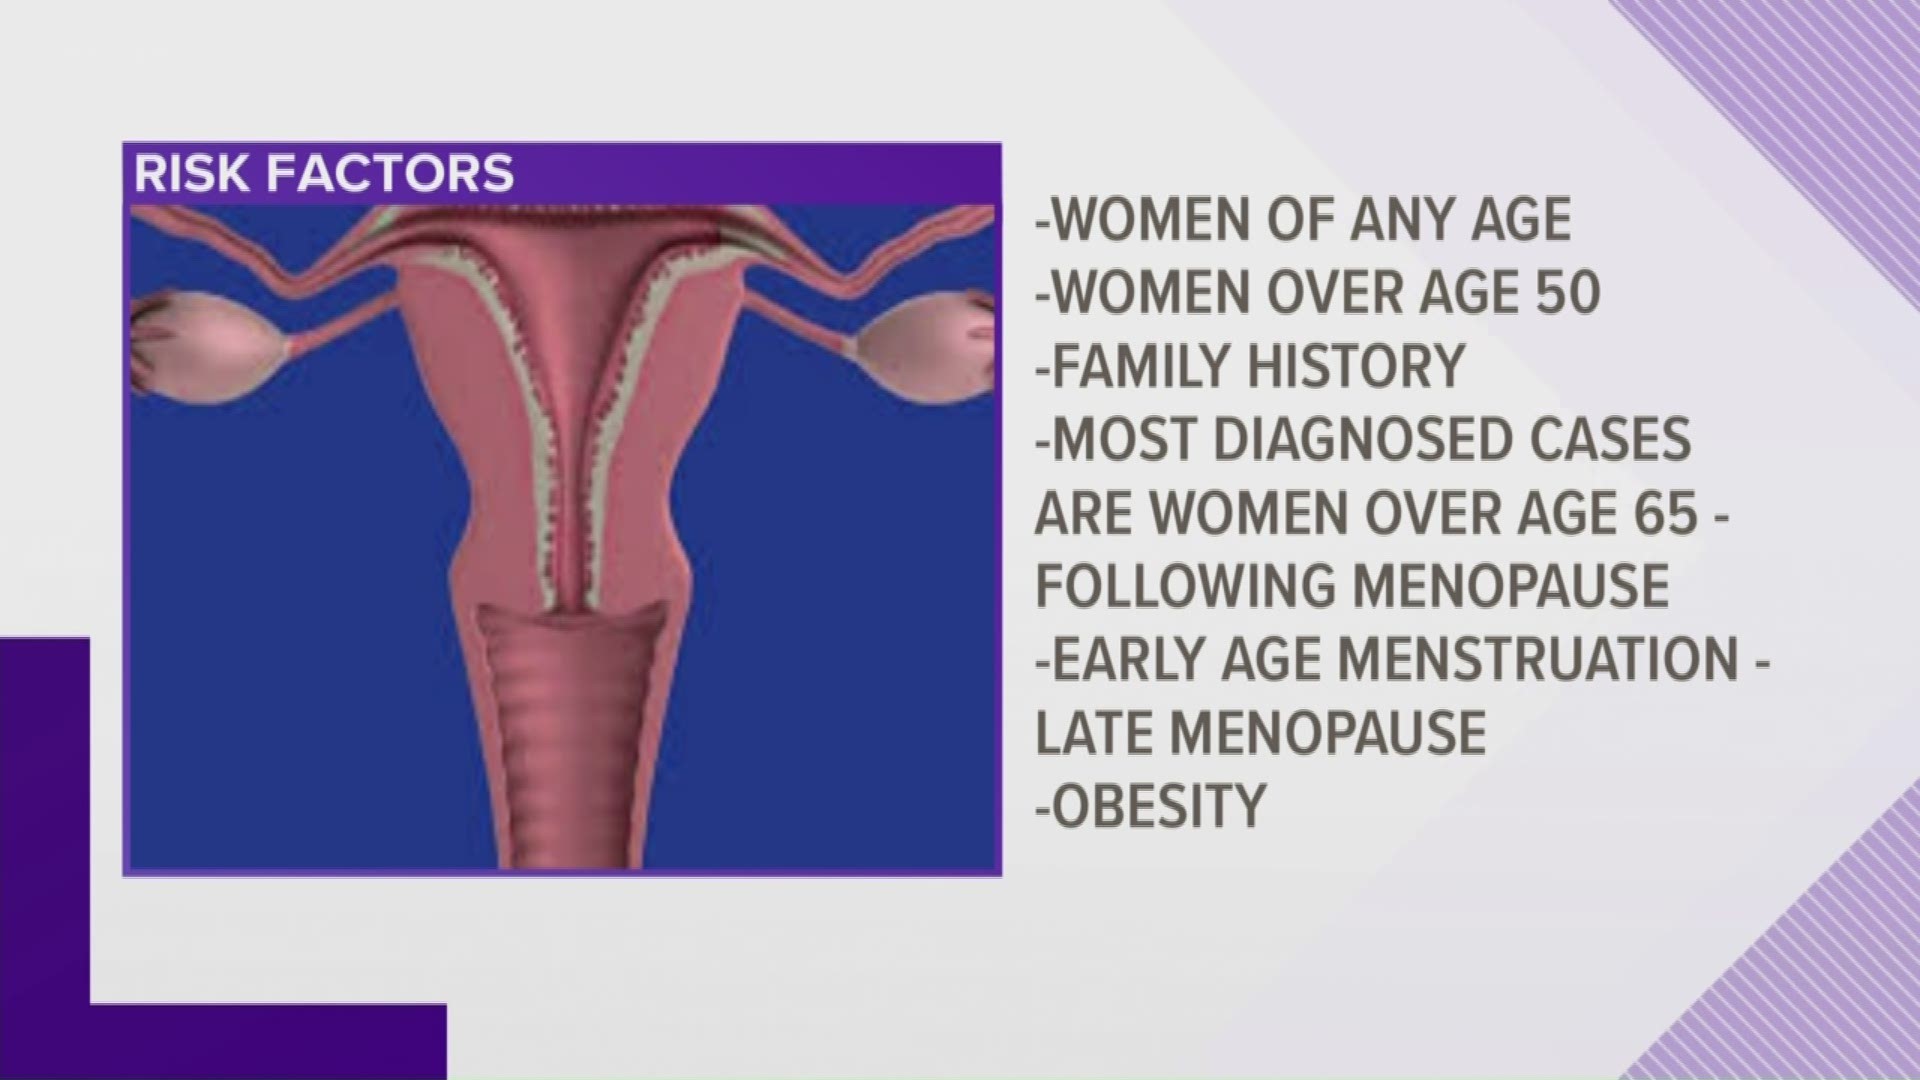 Ovarian cancer is the deadliest of cancers affecting the female reproductive system.